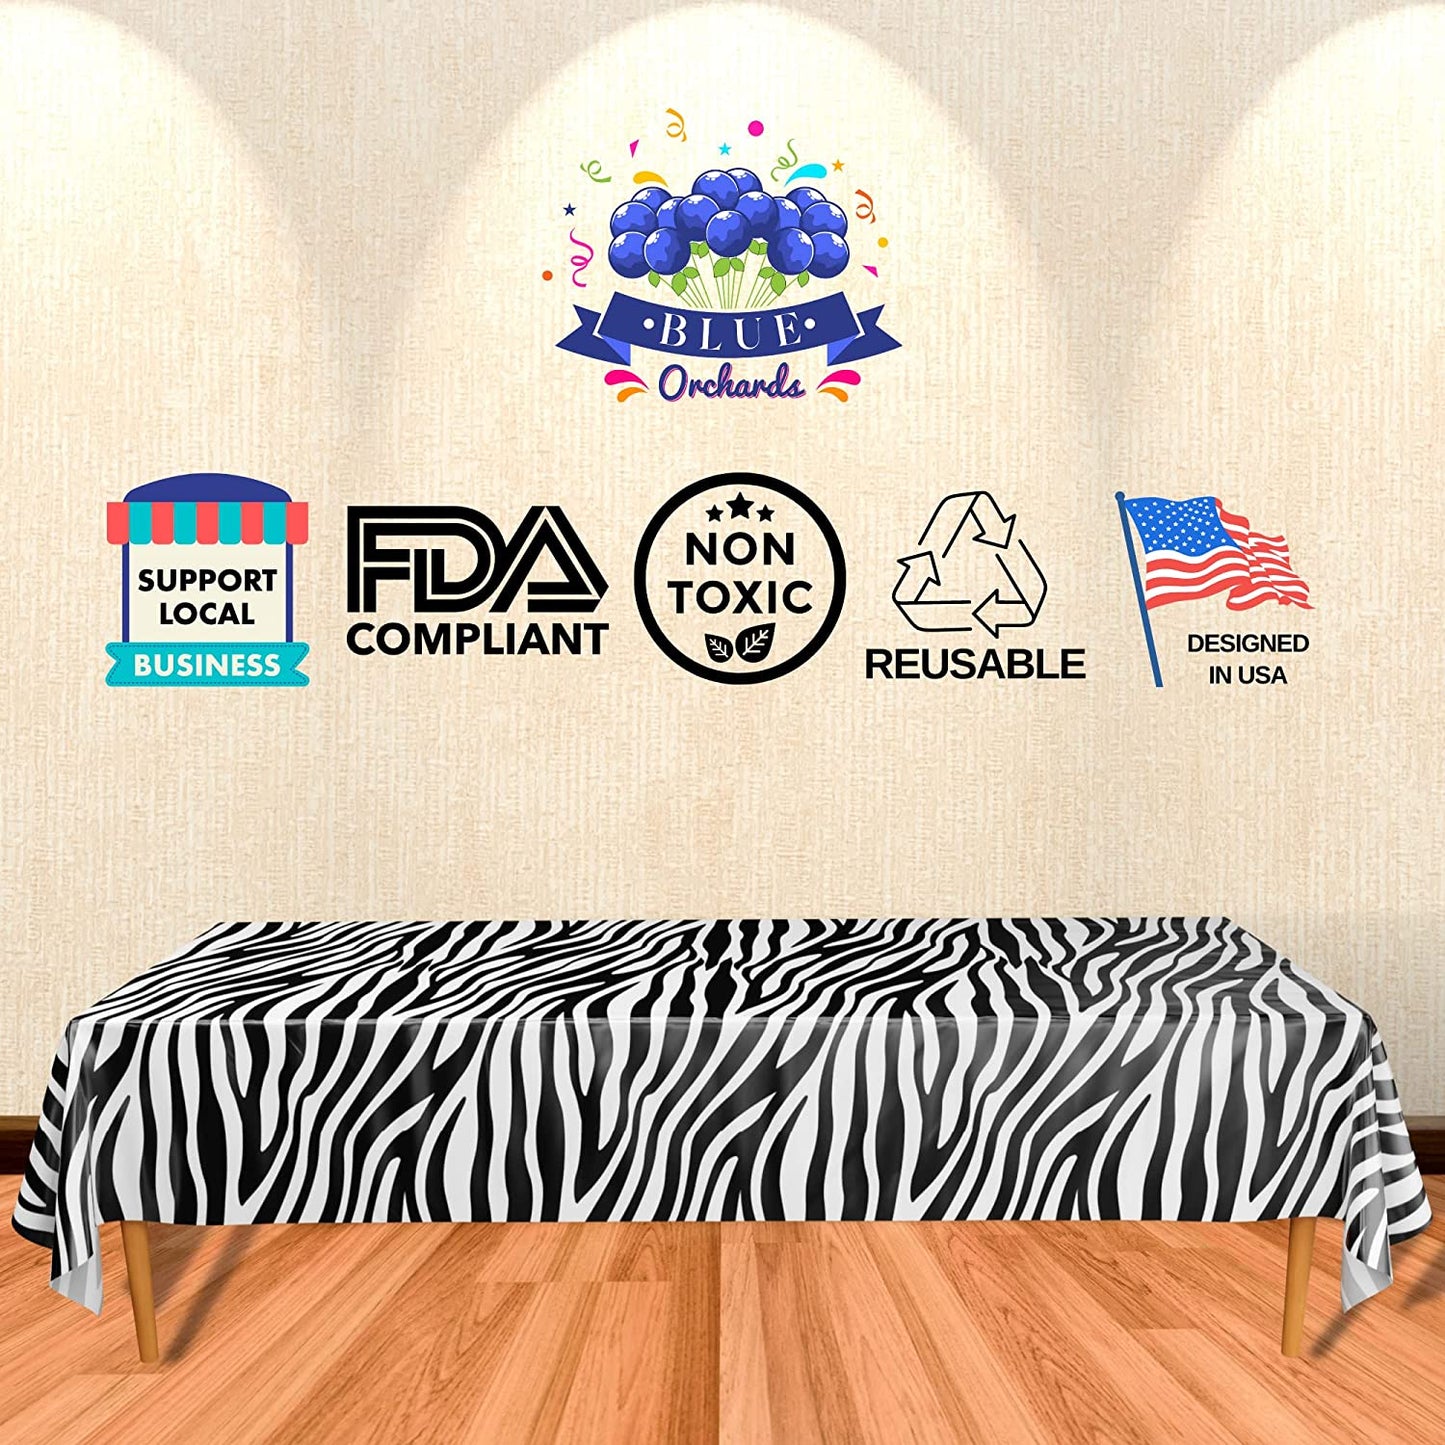 An FDA compliant, non toxic, reusable and designed in USA table covers feature a striking black and white zebra print design, resembling the pattern of a zebra's stripes.